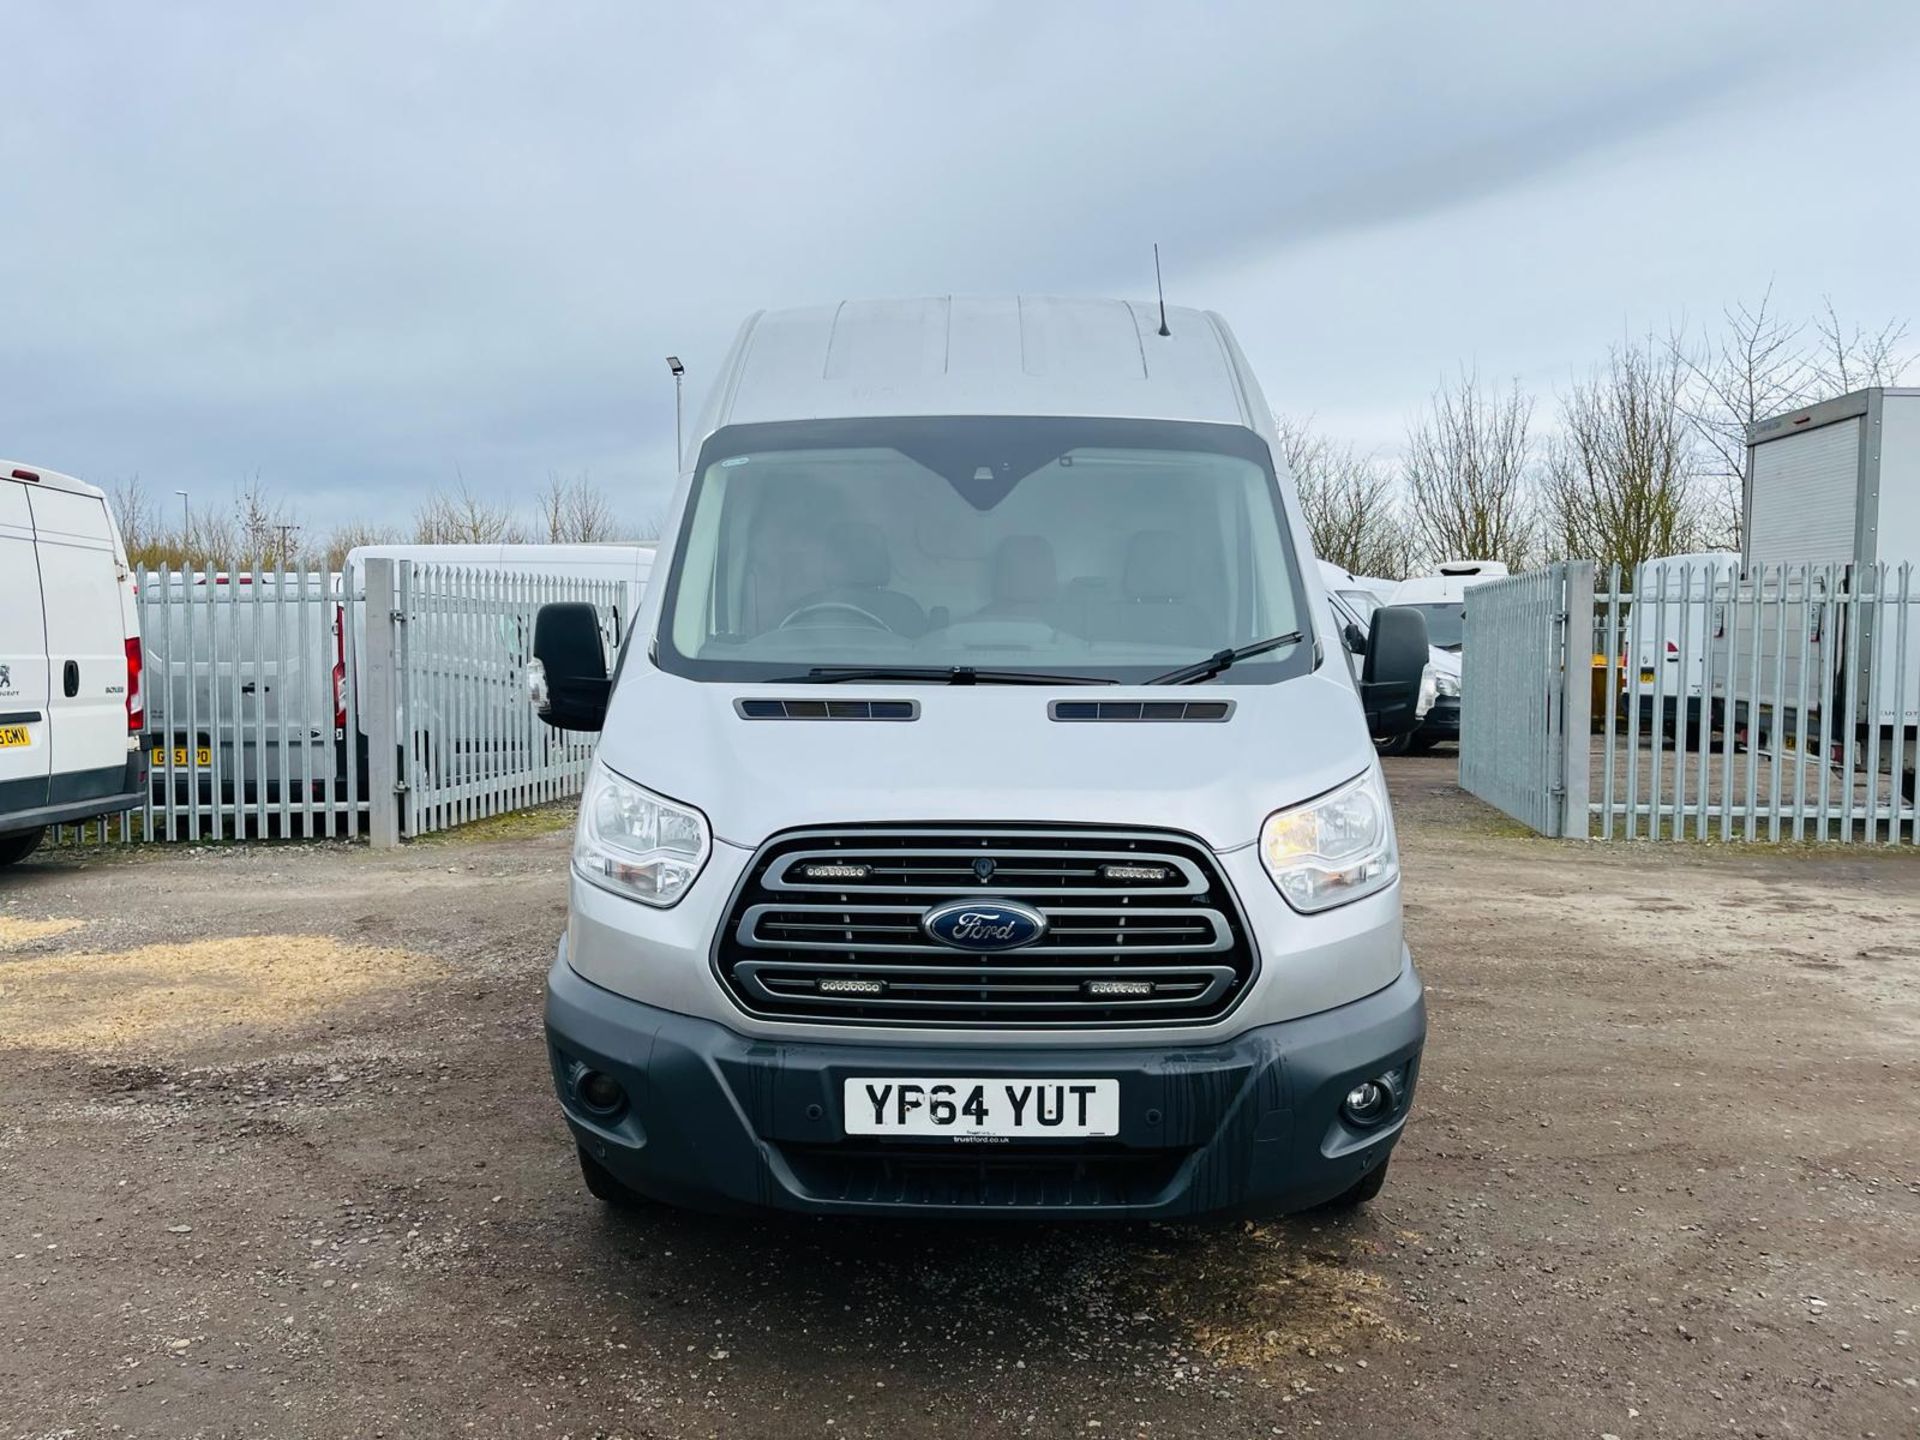 ** ON SALE ** Ford Transit Trend 350 TDCI 125 2.2 L3 H3 2014 '64 Reg' - Parking sensors - Air Con - Image 2 of 27